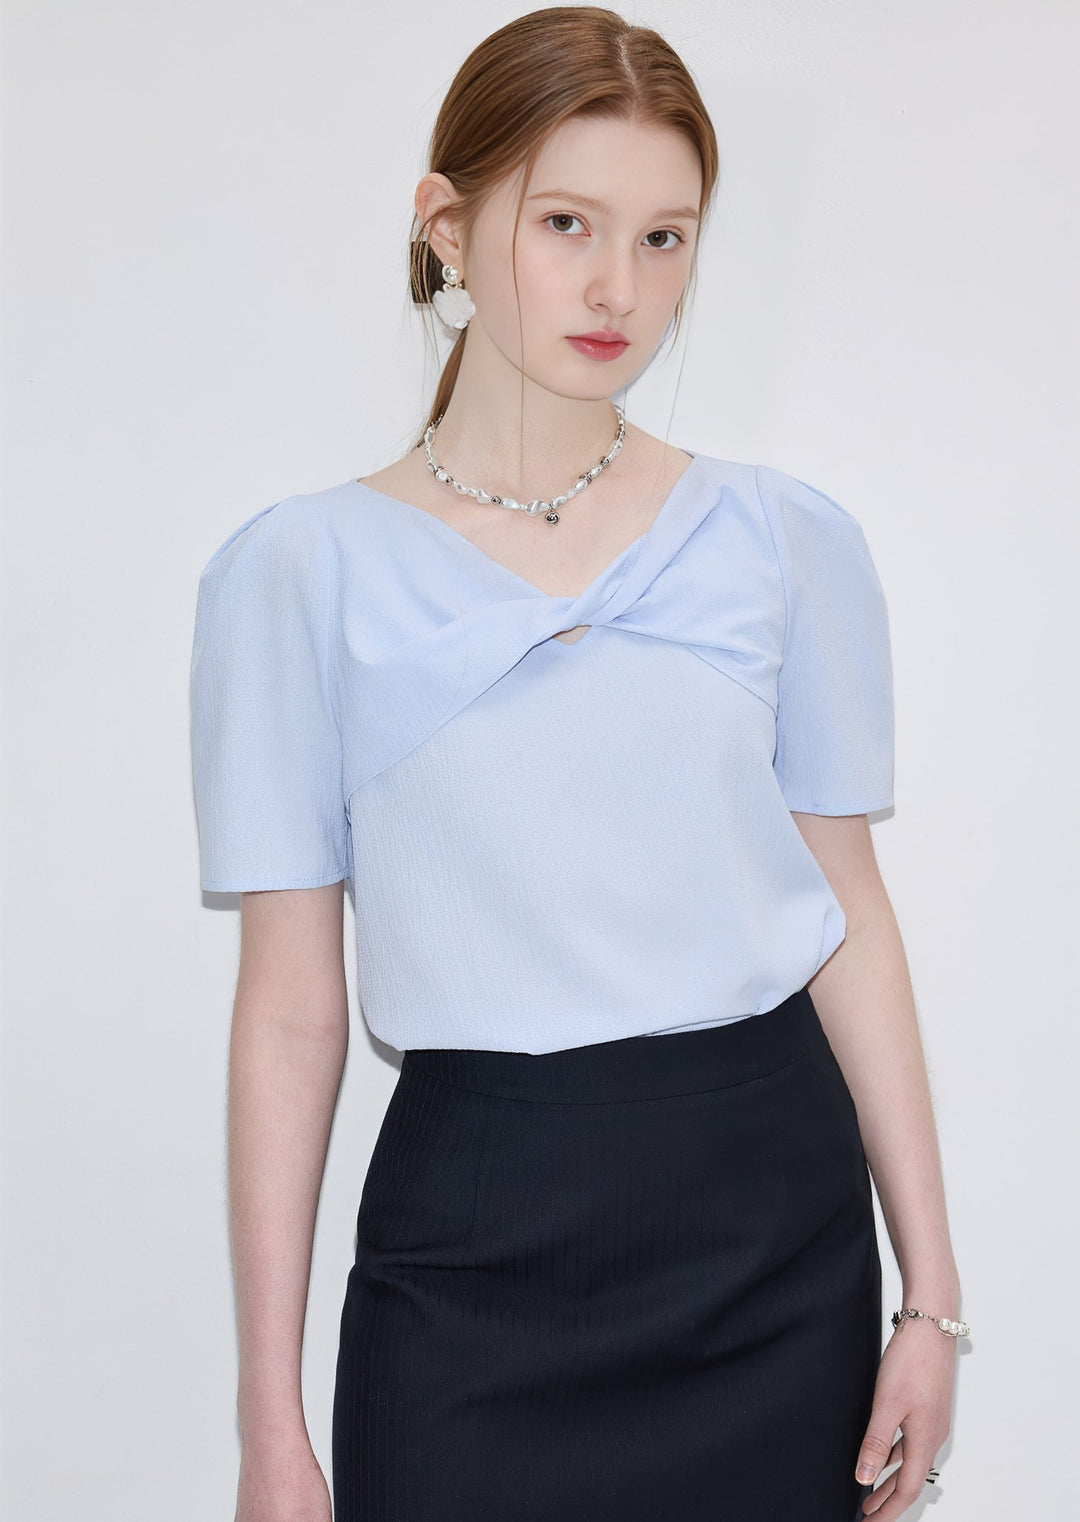 TEXTURED SOLID COLOR SHIRT - ANLEM